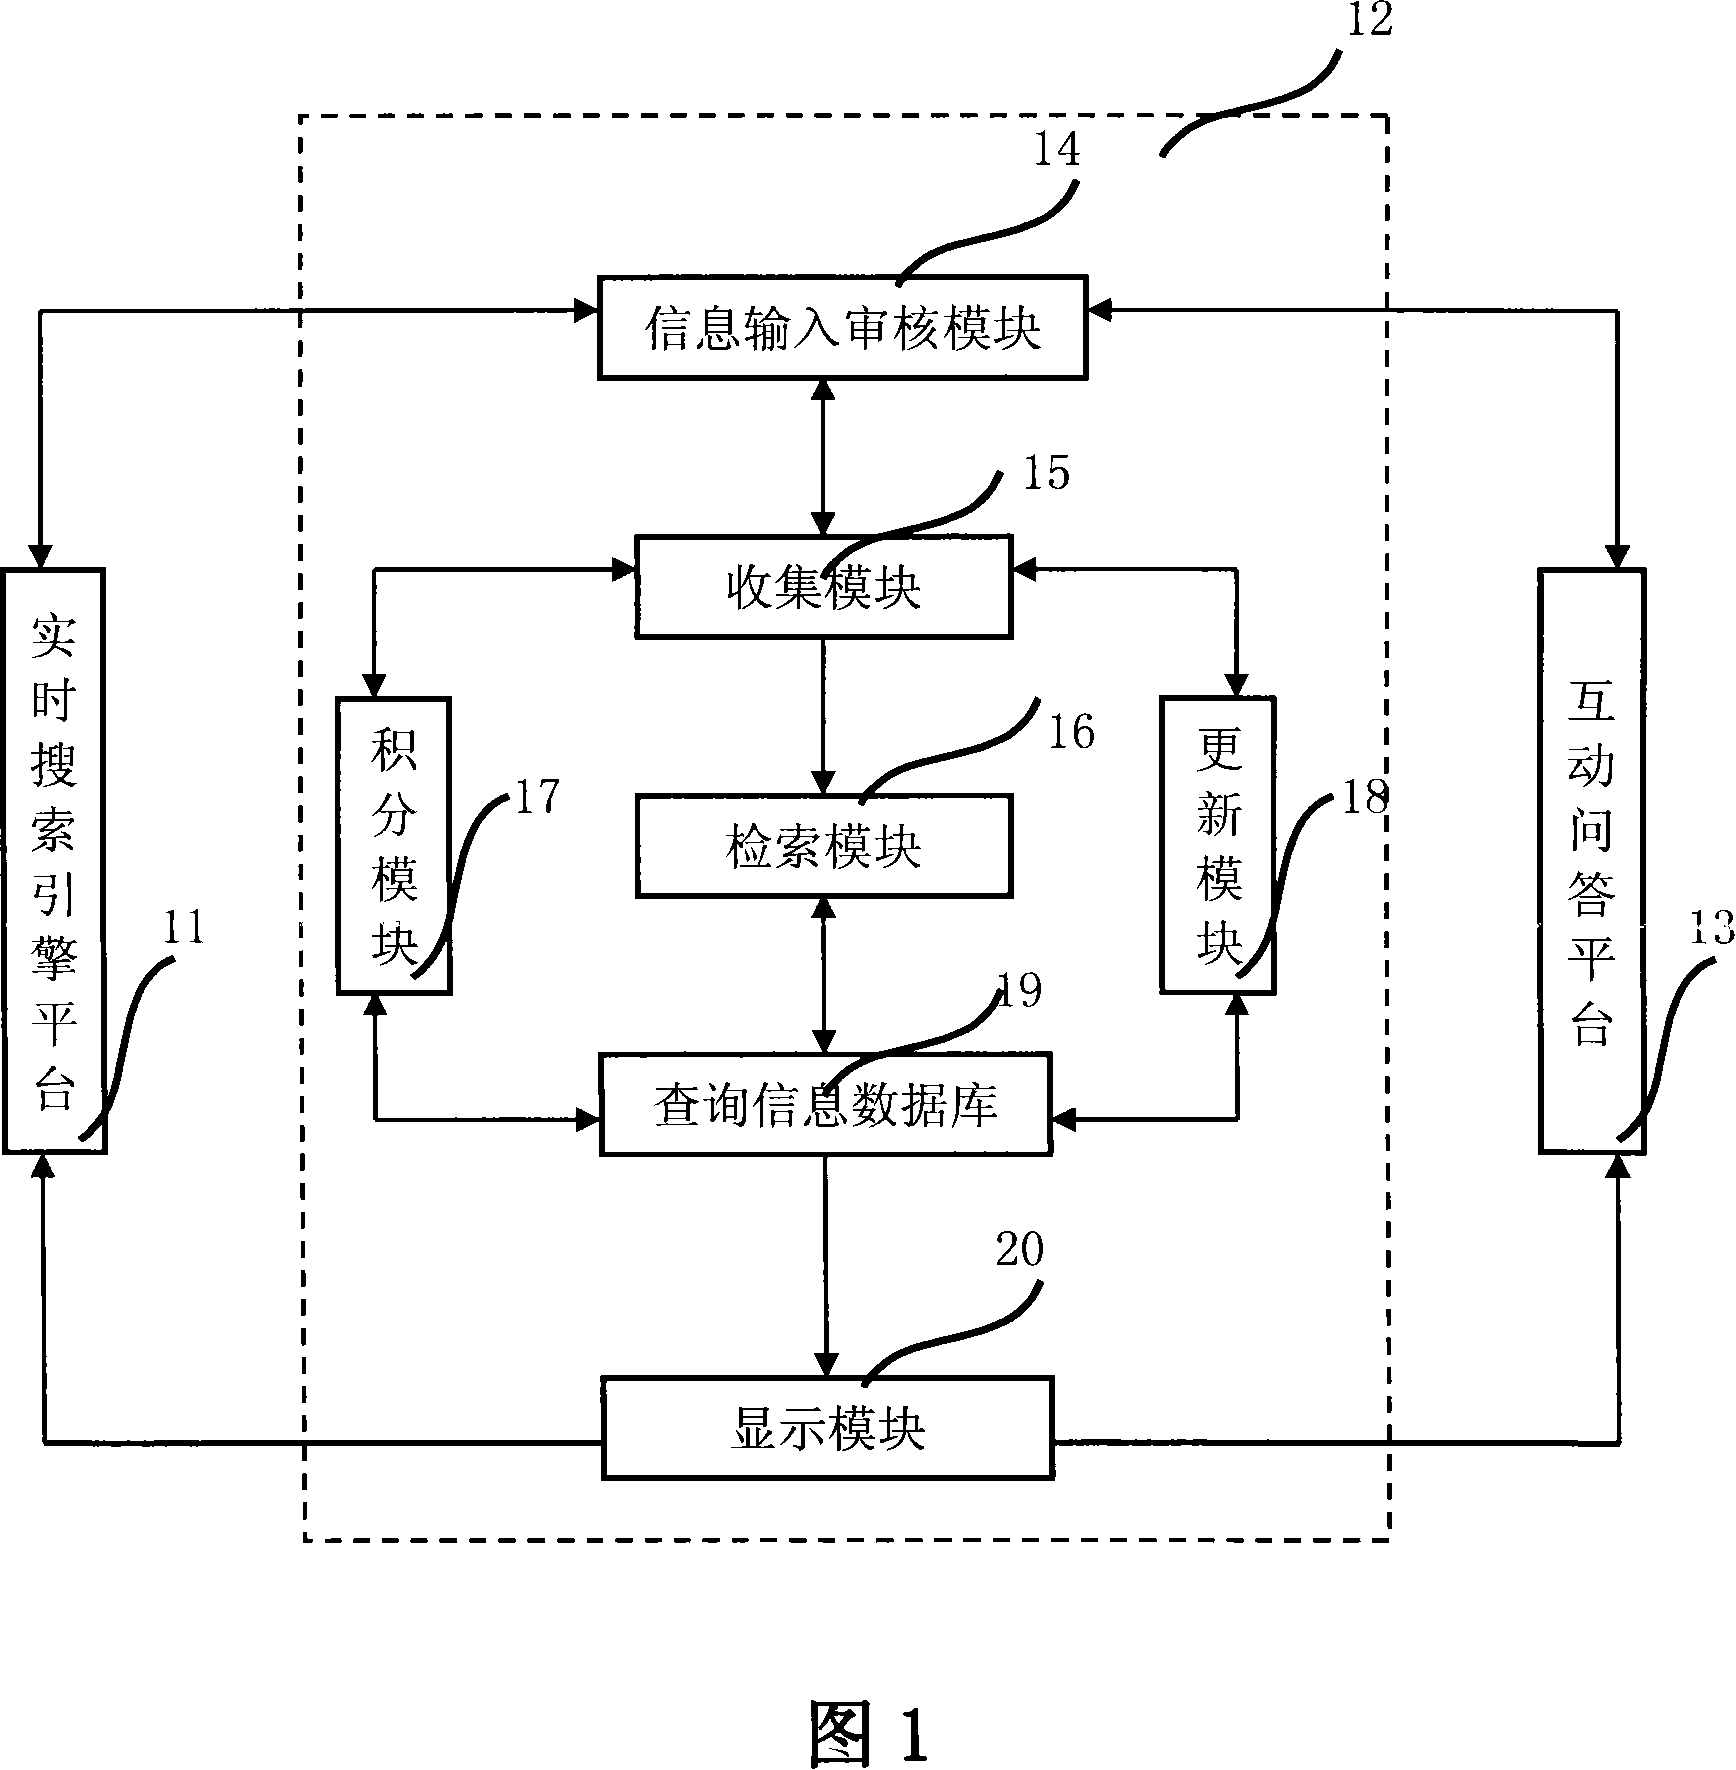 Interactive querying system and method